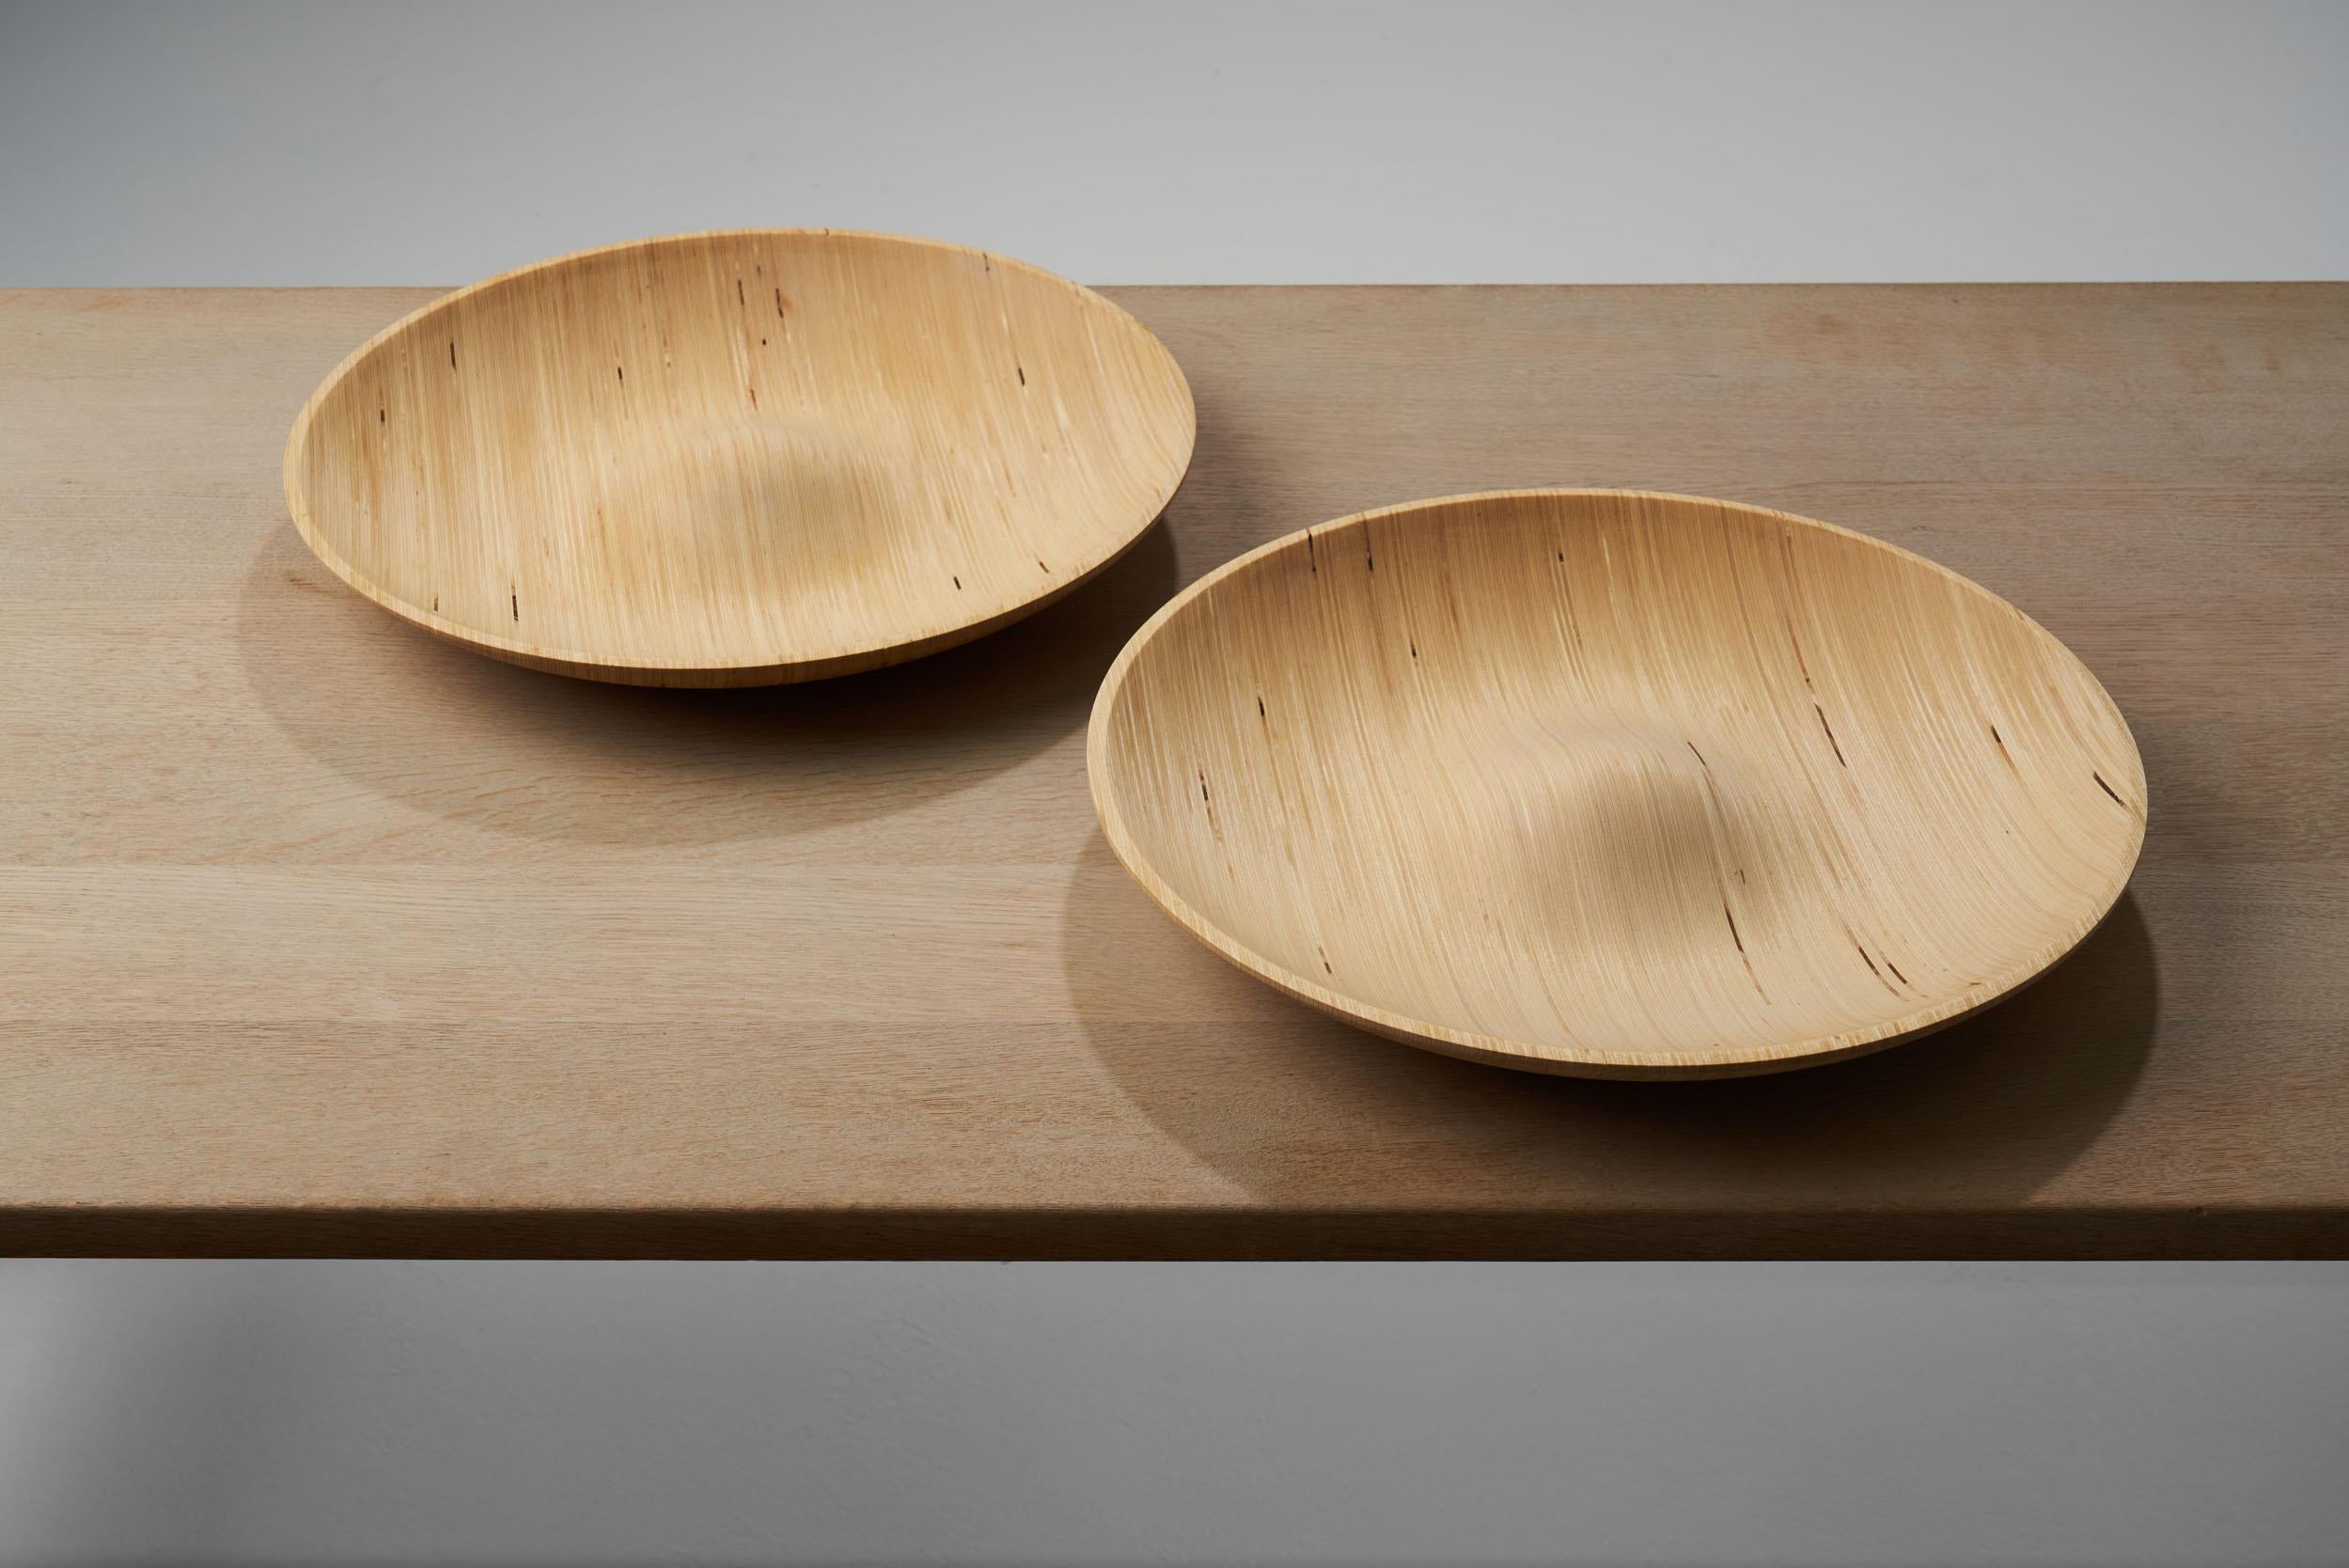 Late 20th Century Wooden Plates by Antti Nurmesniemi, Finland, circa 1980s